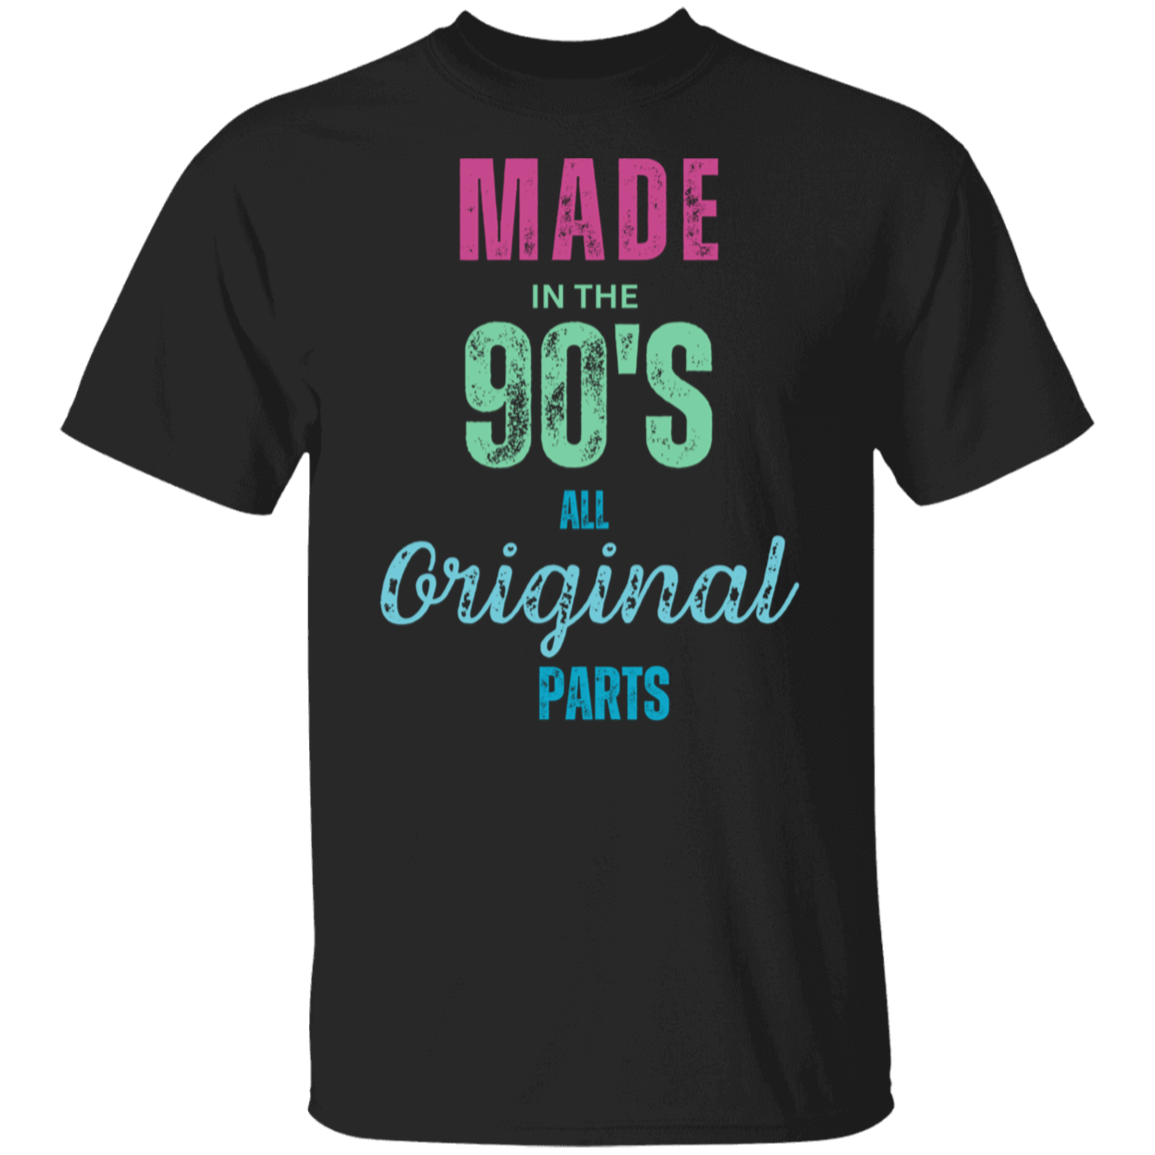 MADE IN THE 90'S   5.3 oz. T-Shirt